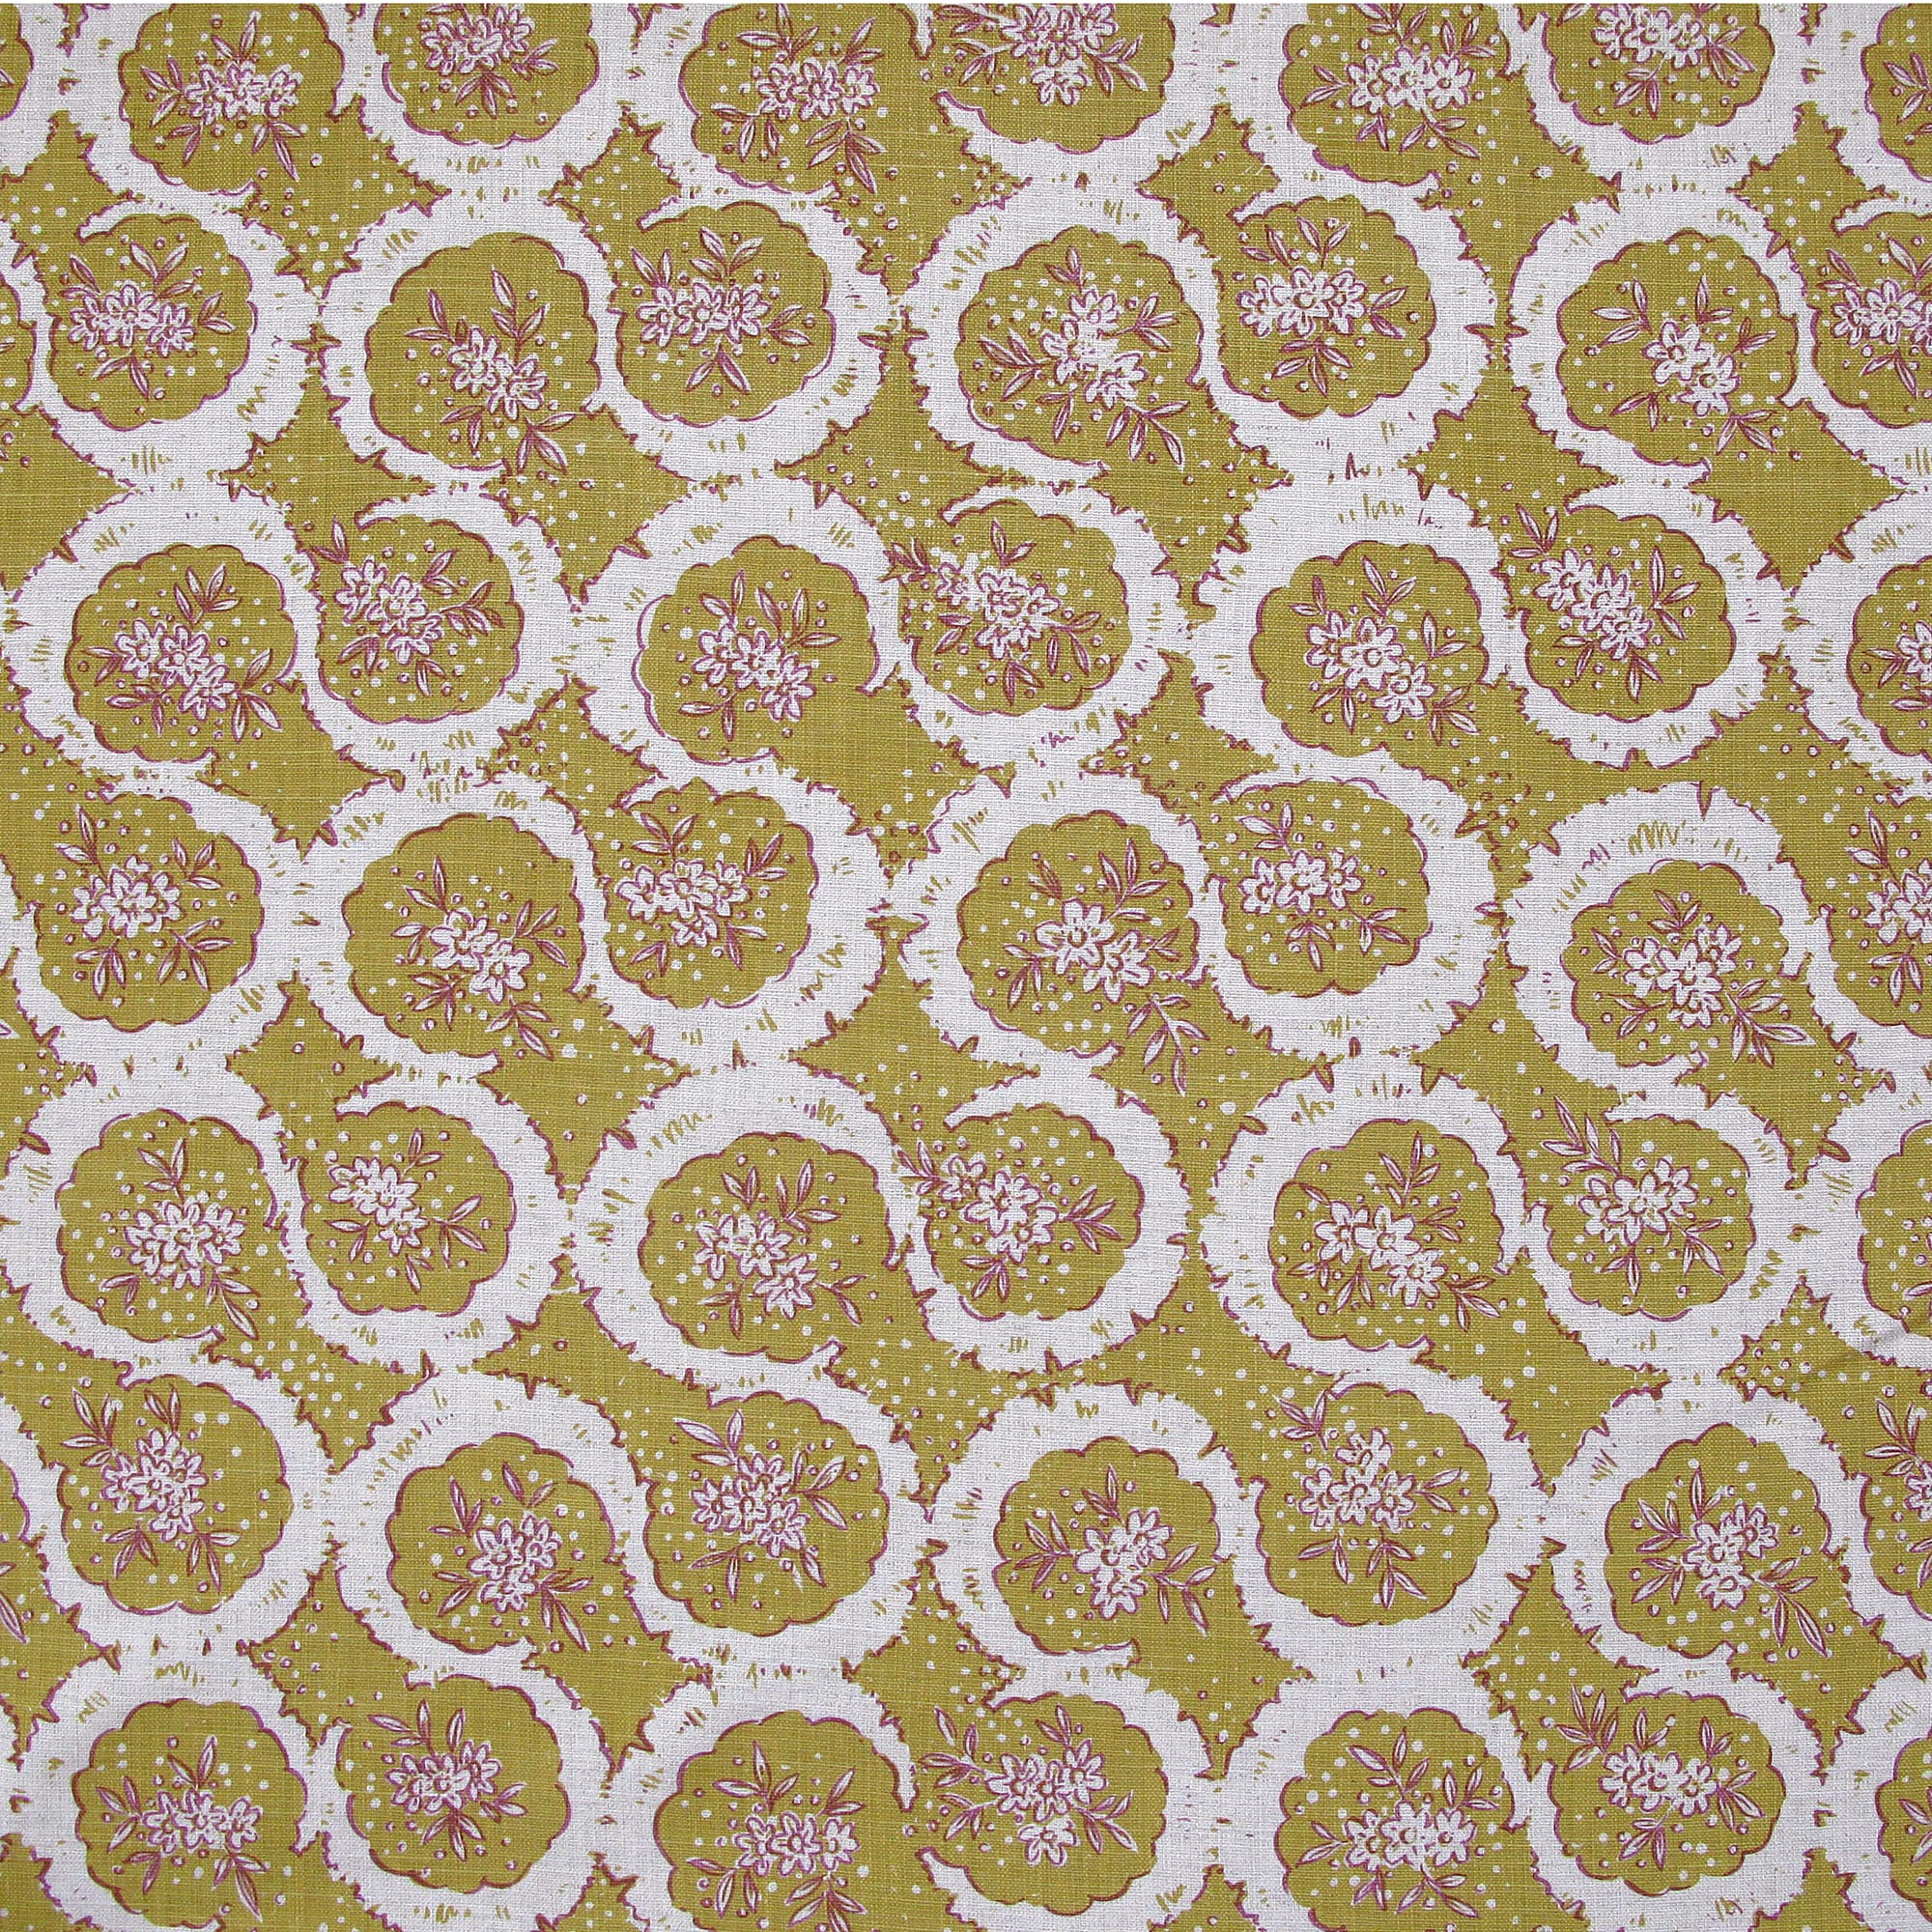 Detail of fabric in a meandering floral grid print in white and pink on a mustard field.